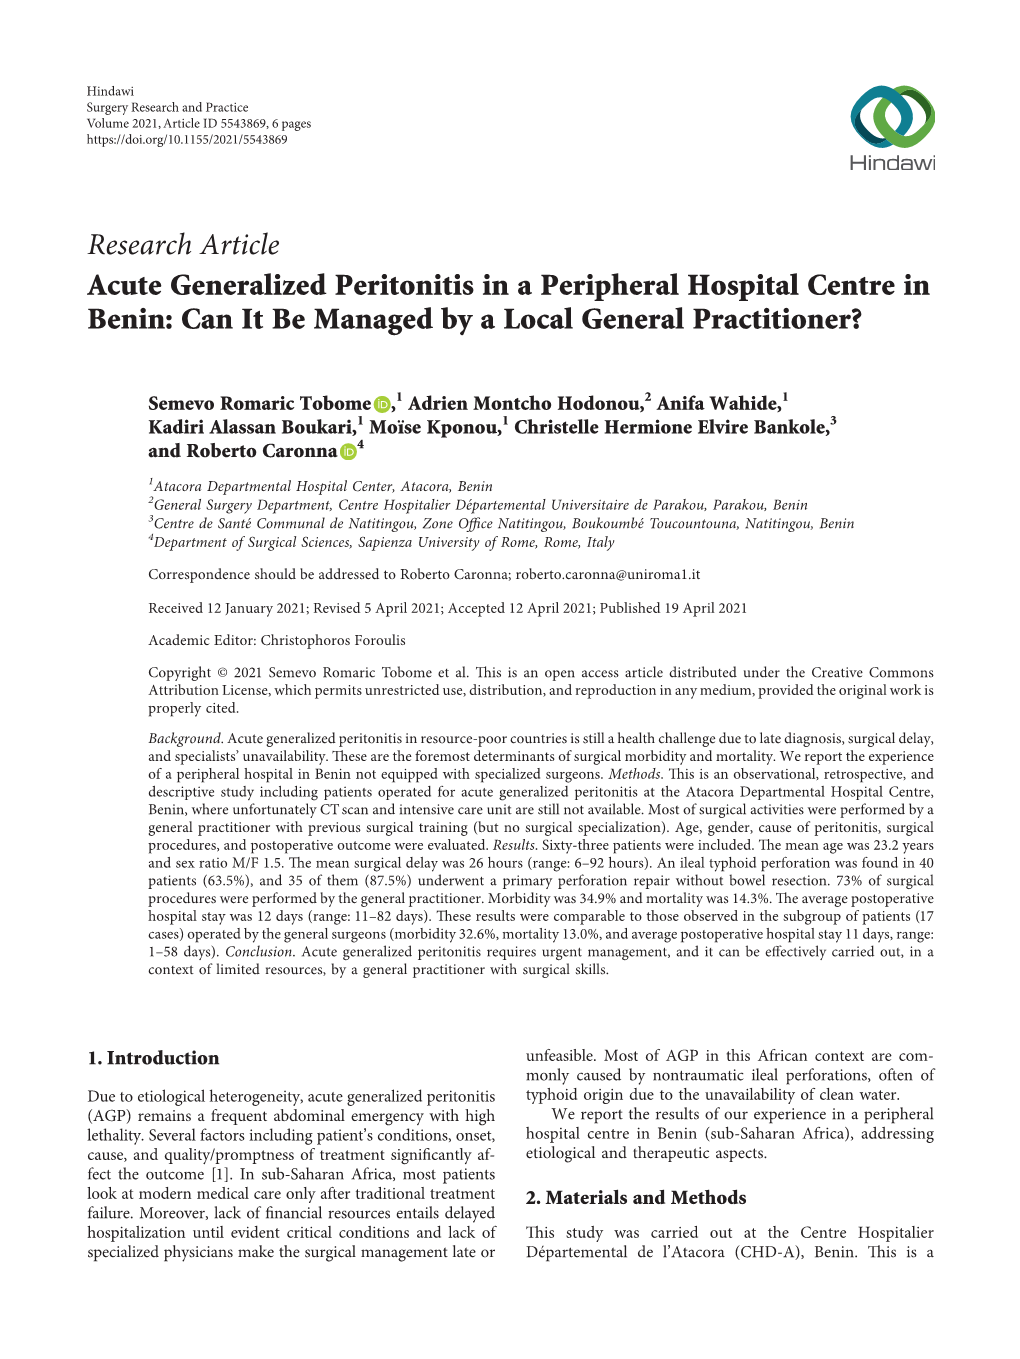 Acute Generalized Peritonitis in a Peripheral Hospital Centre in Benin: Can It Be Managed by a Local General Practitioner?